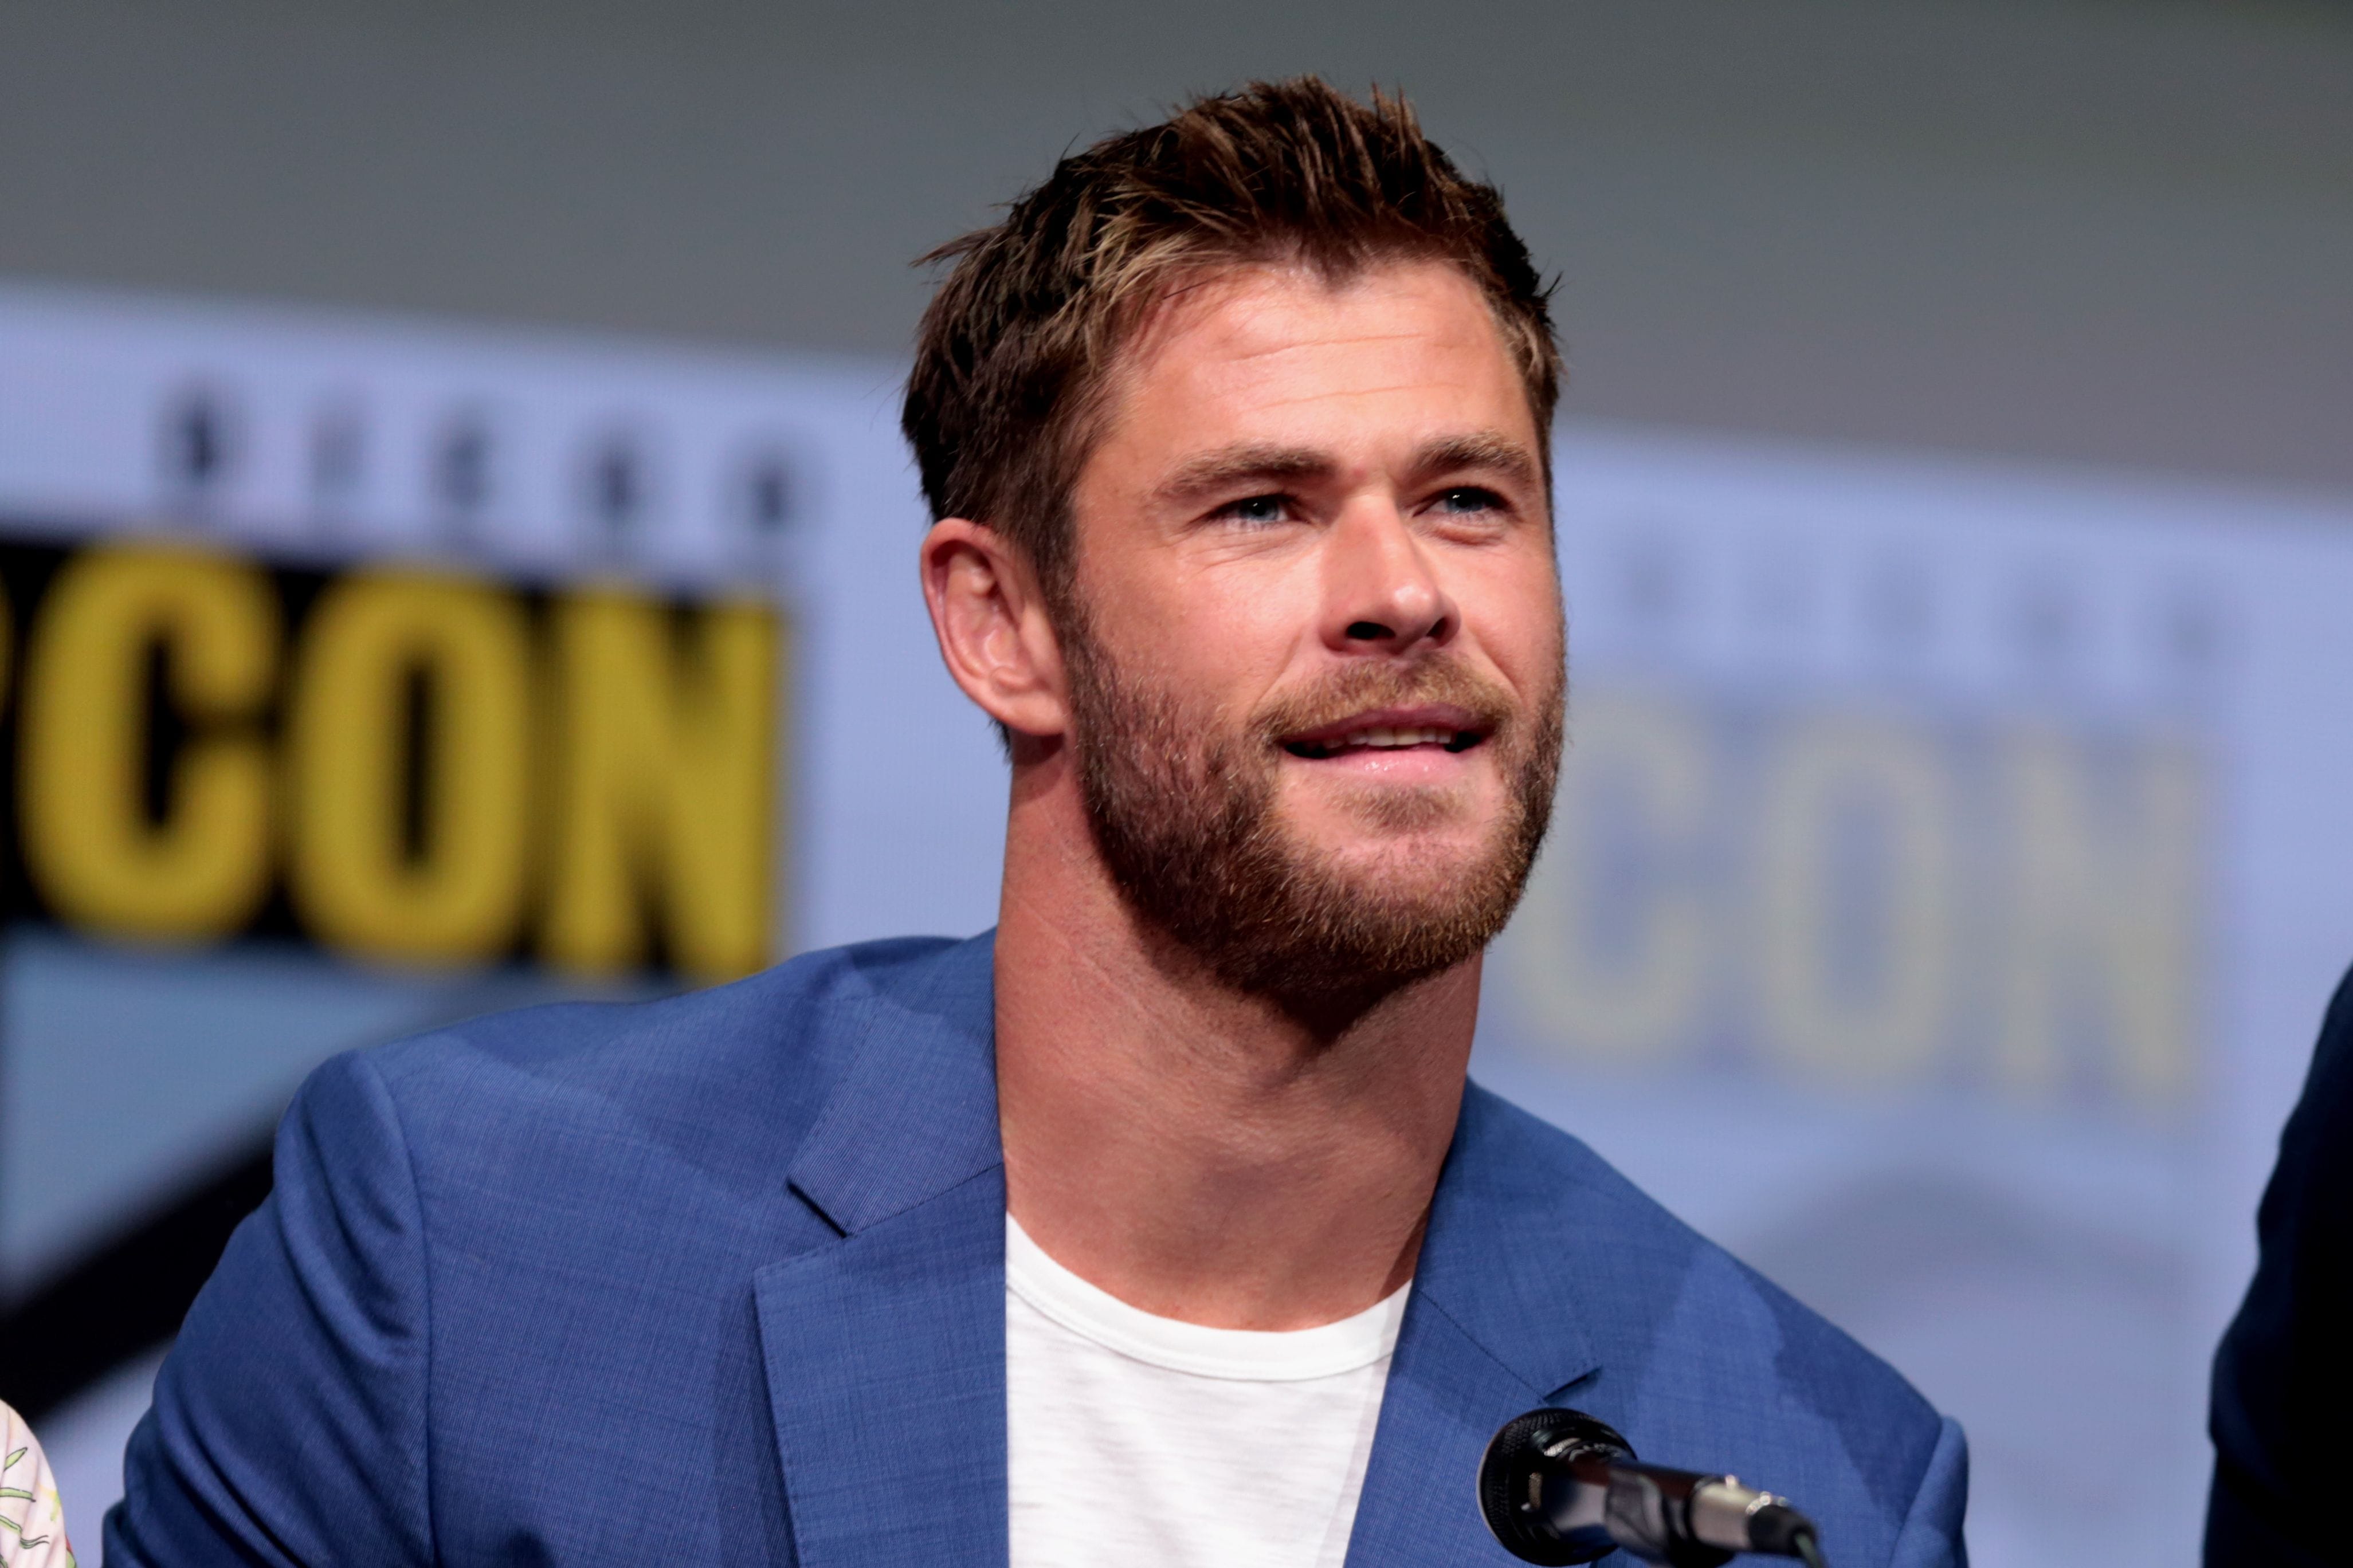 Chris Hemsworth and Toni Collette to star in Australian-made Netflix productions